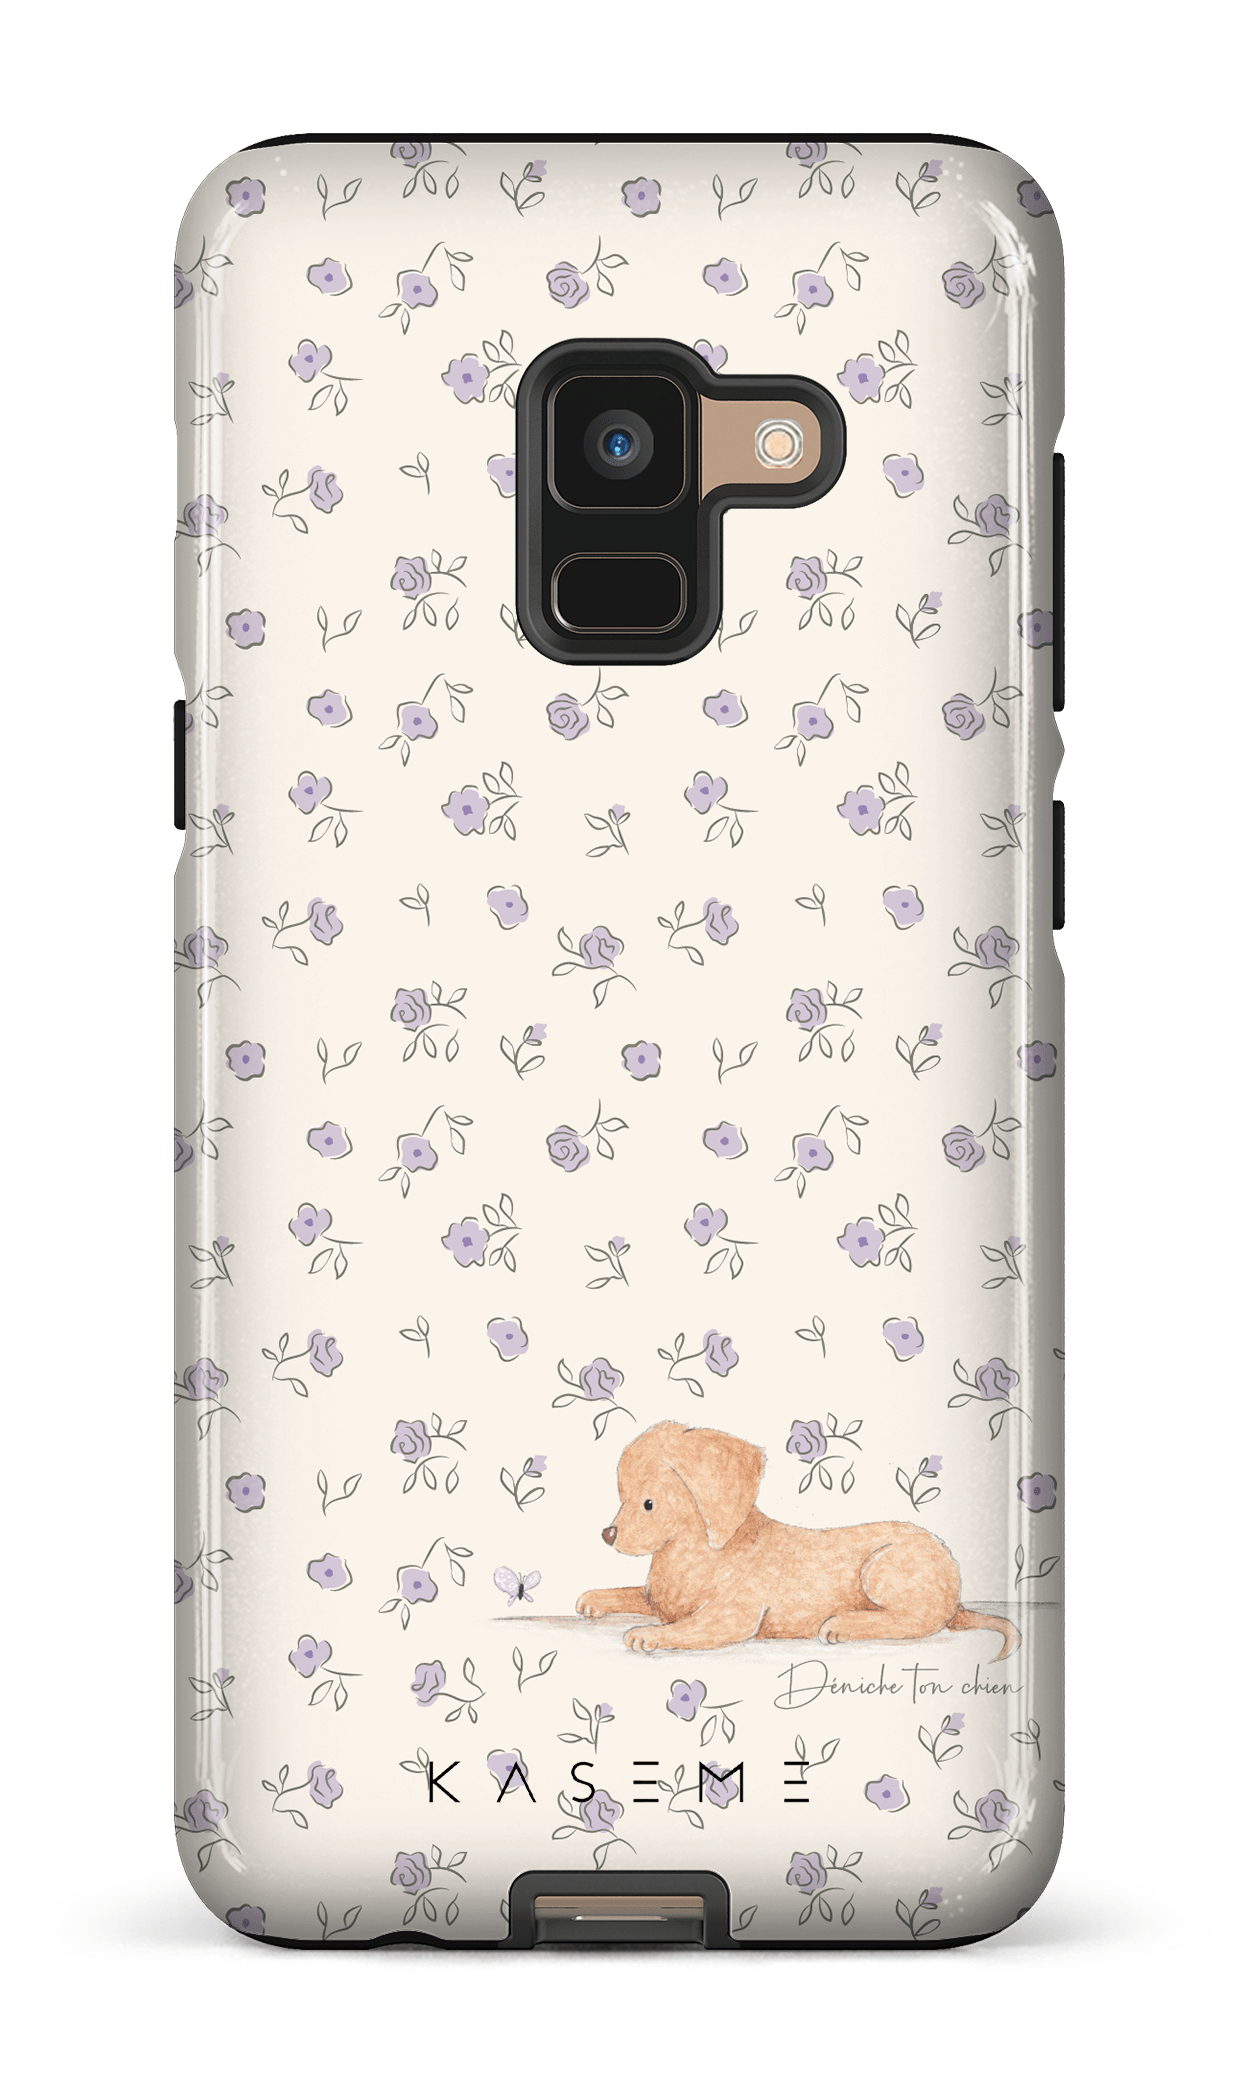 Fur-Ever A Dog Lover by Déniche Ton Chien - Galaxy A8